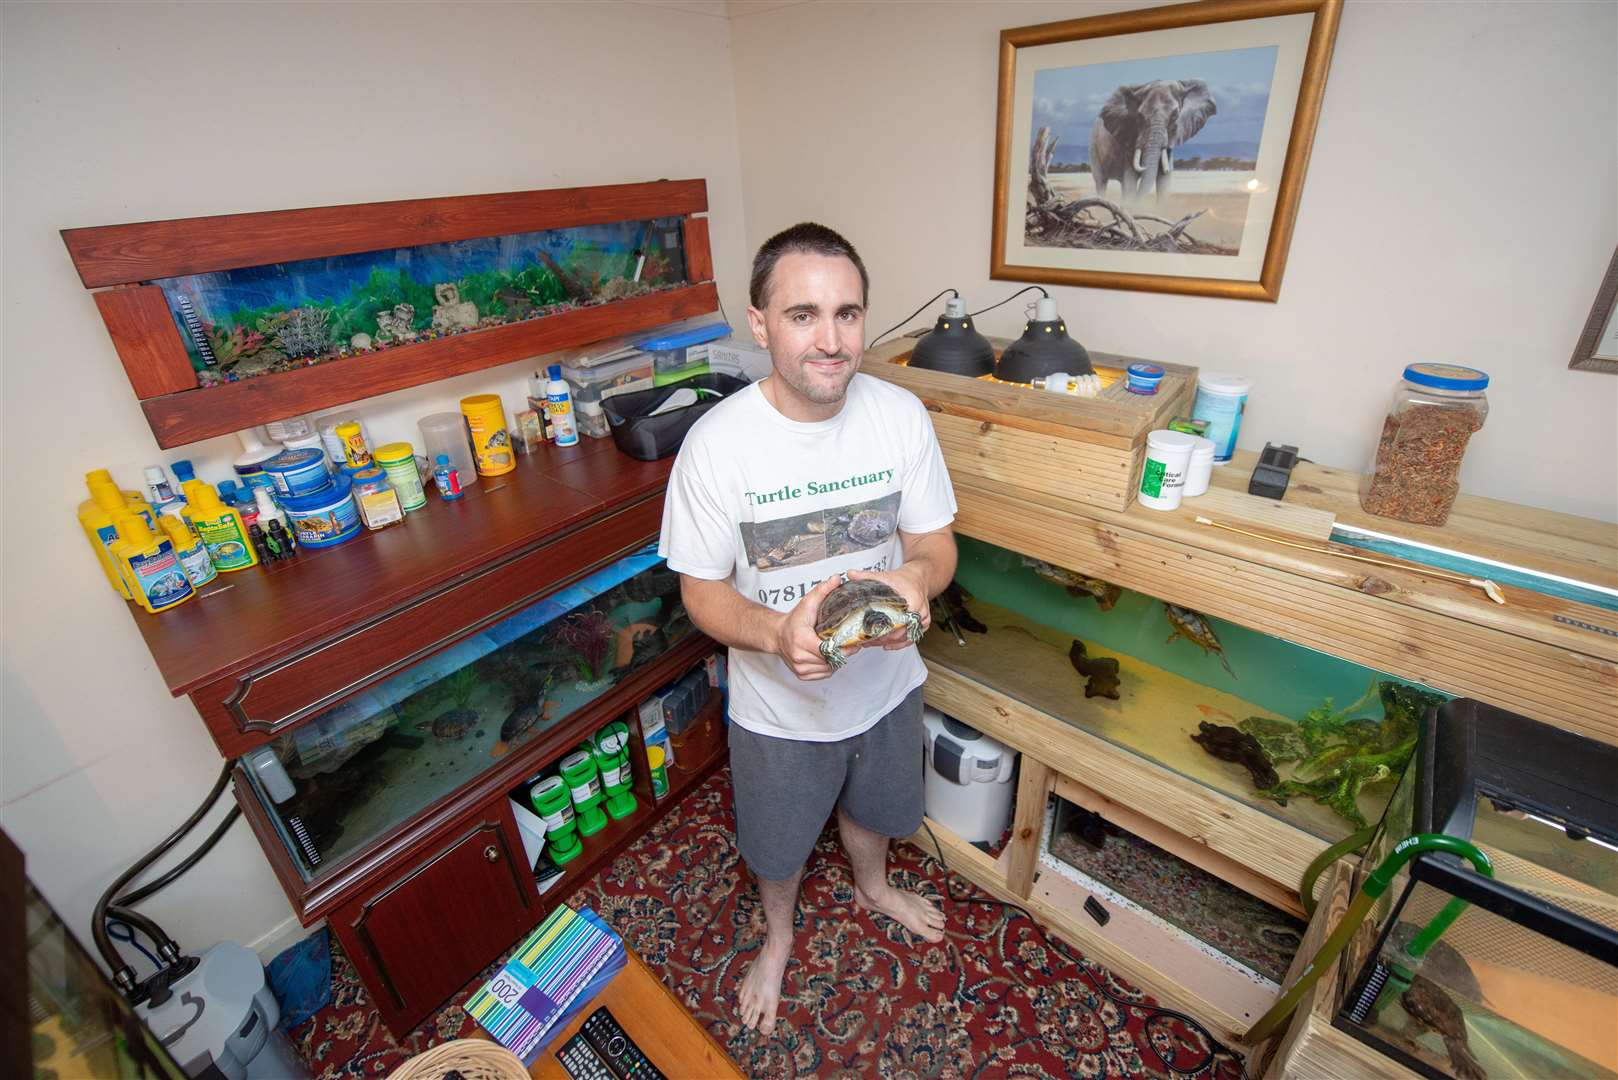 Michael has fulfilled his childhood dream by filling his home with more than a thousand turtles.